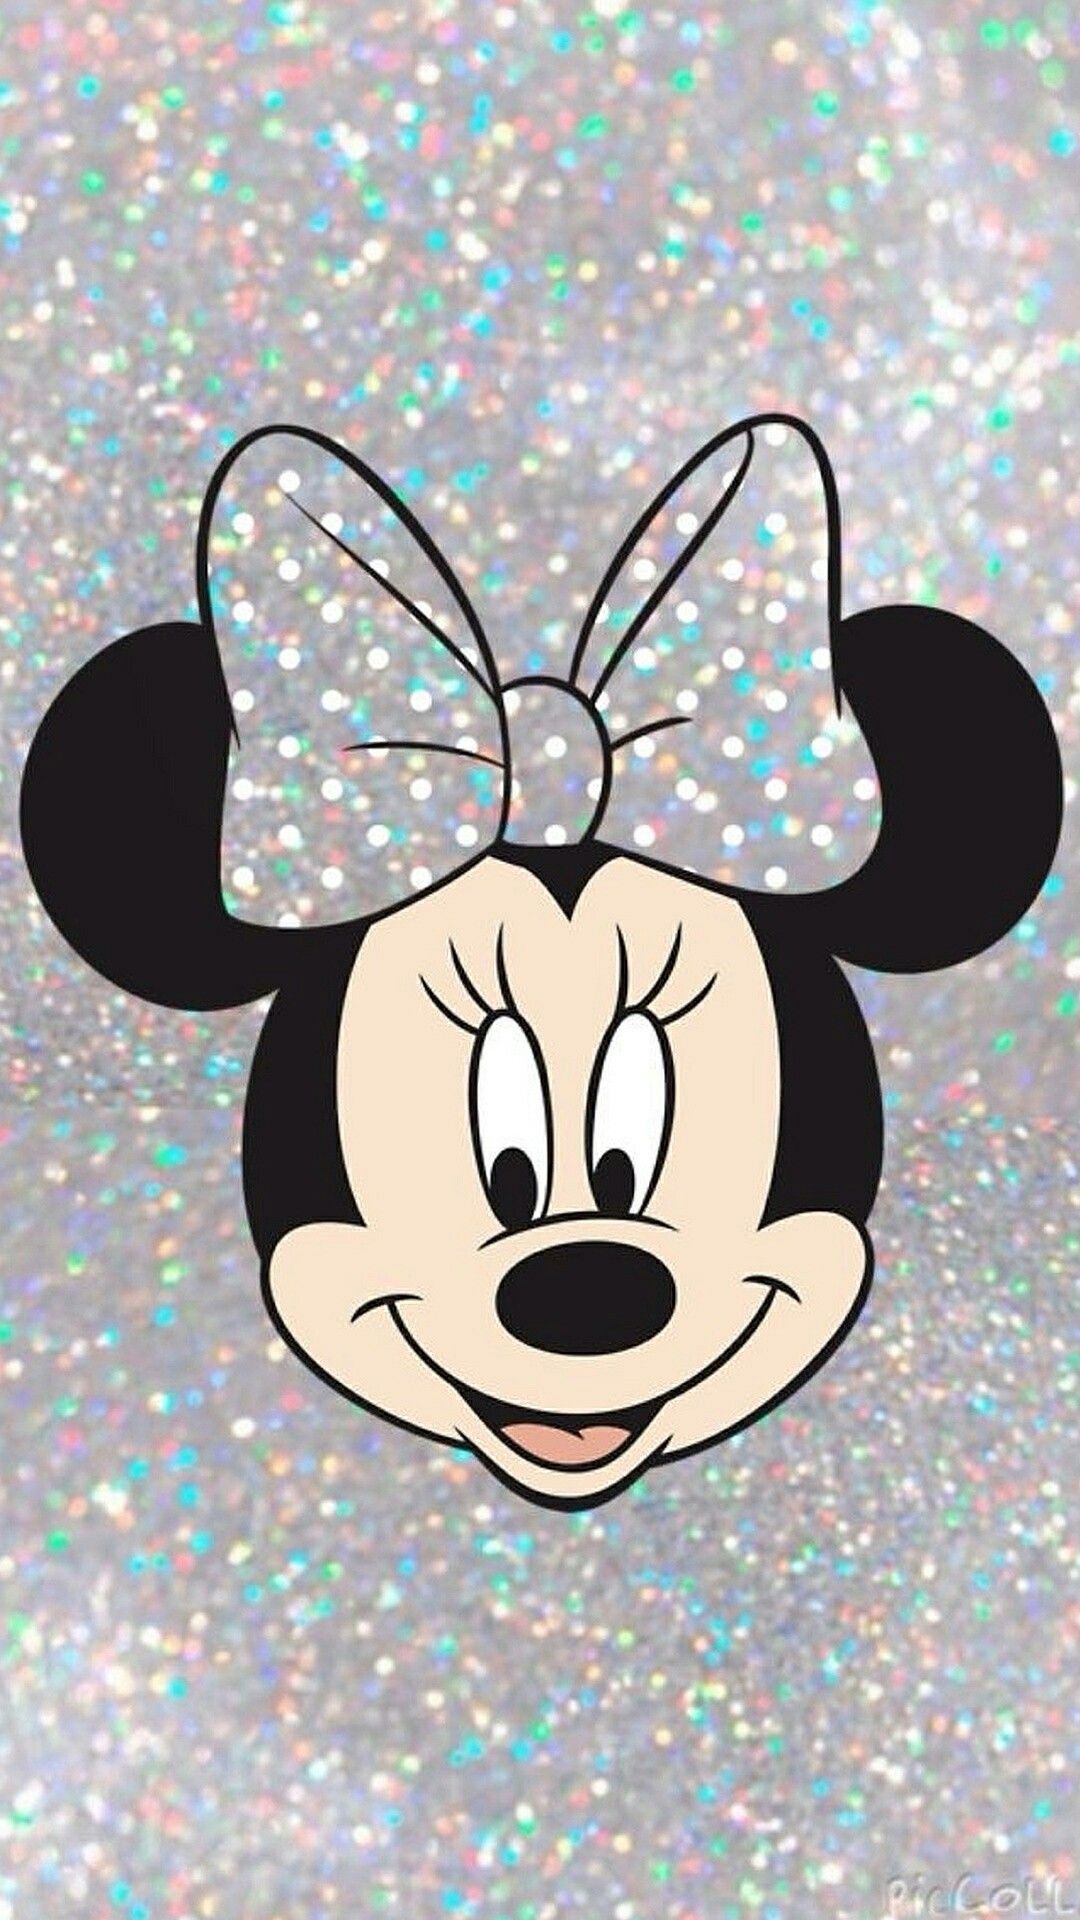 Minnie Mouse wallpaper for iPhone and Android! - Minnie Mouse